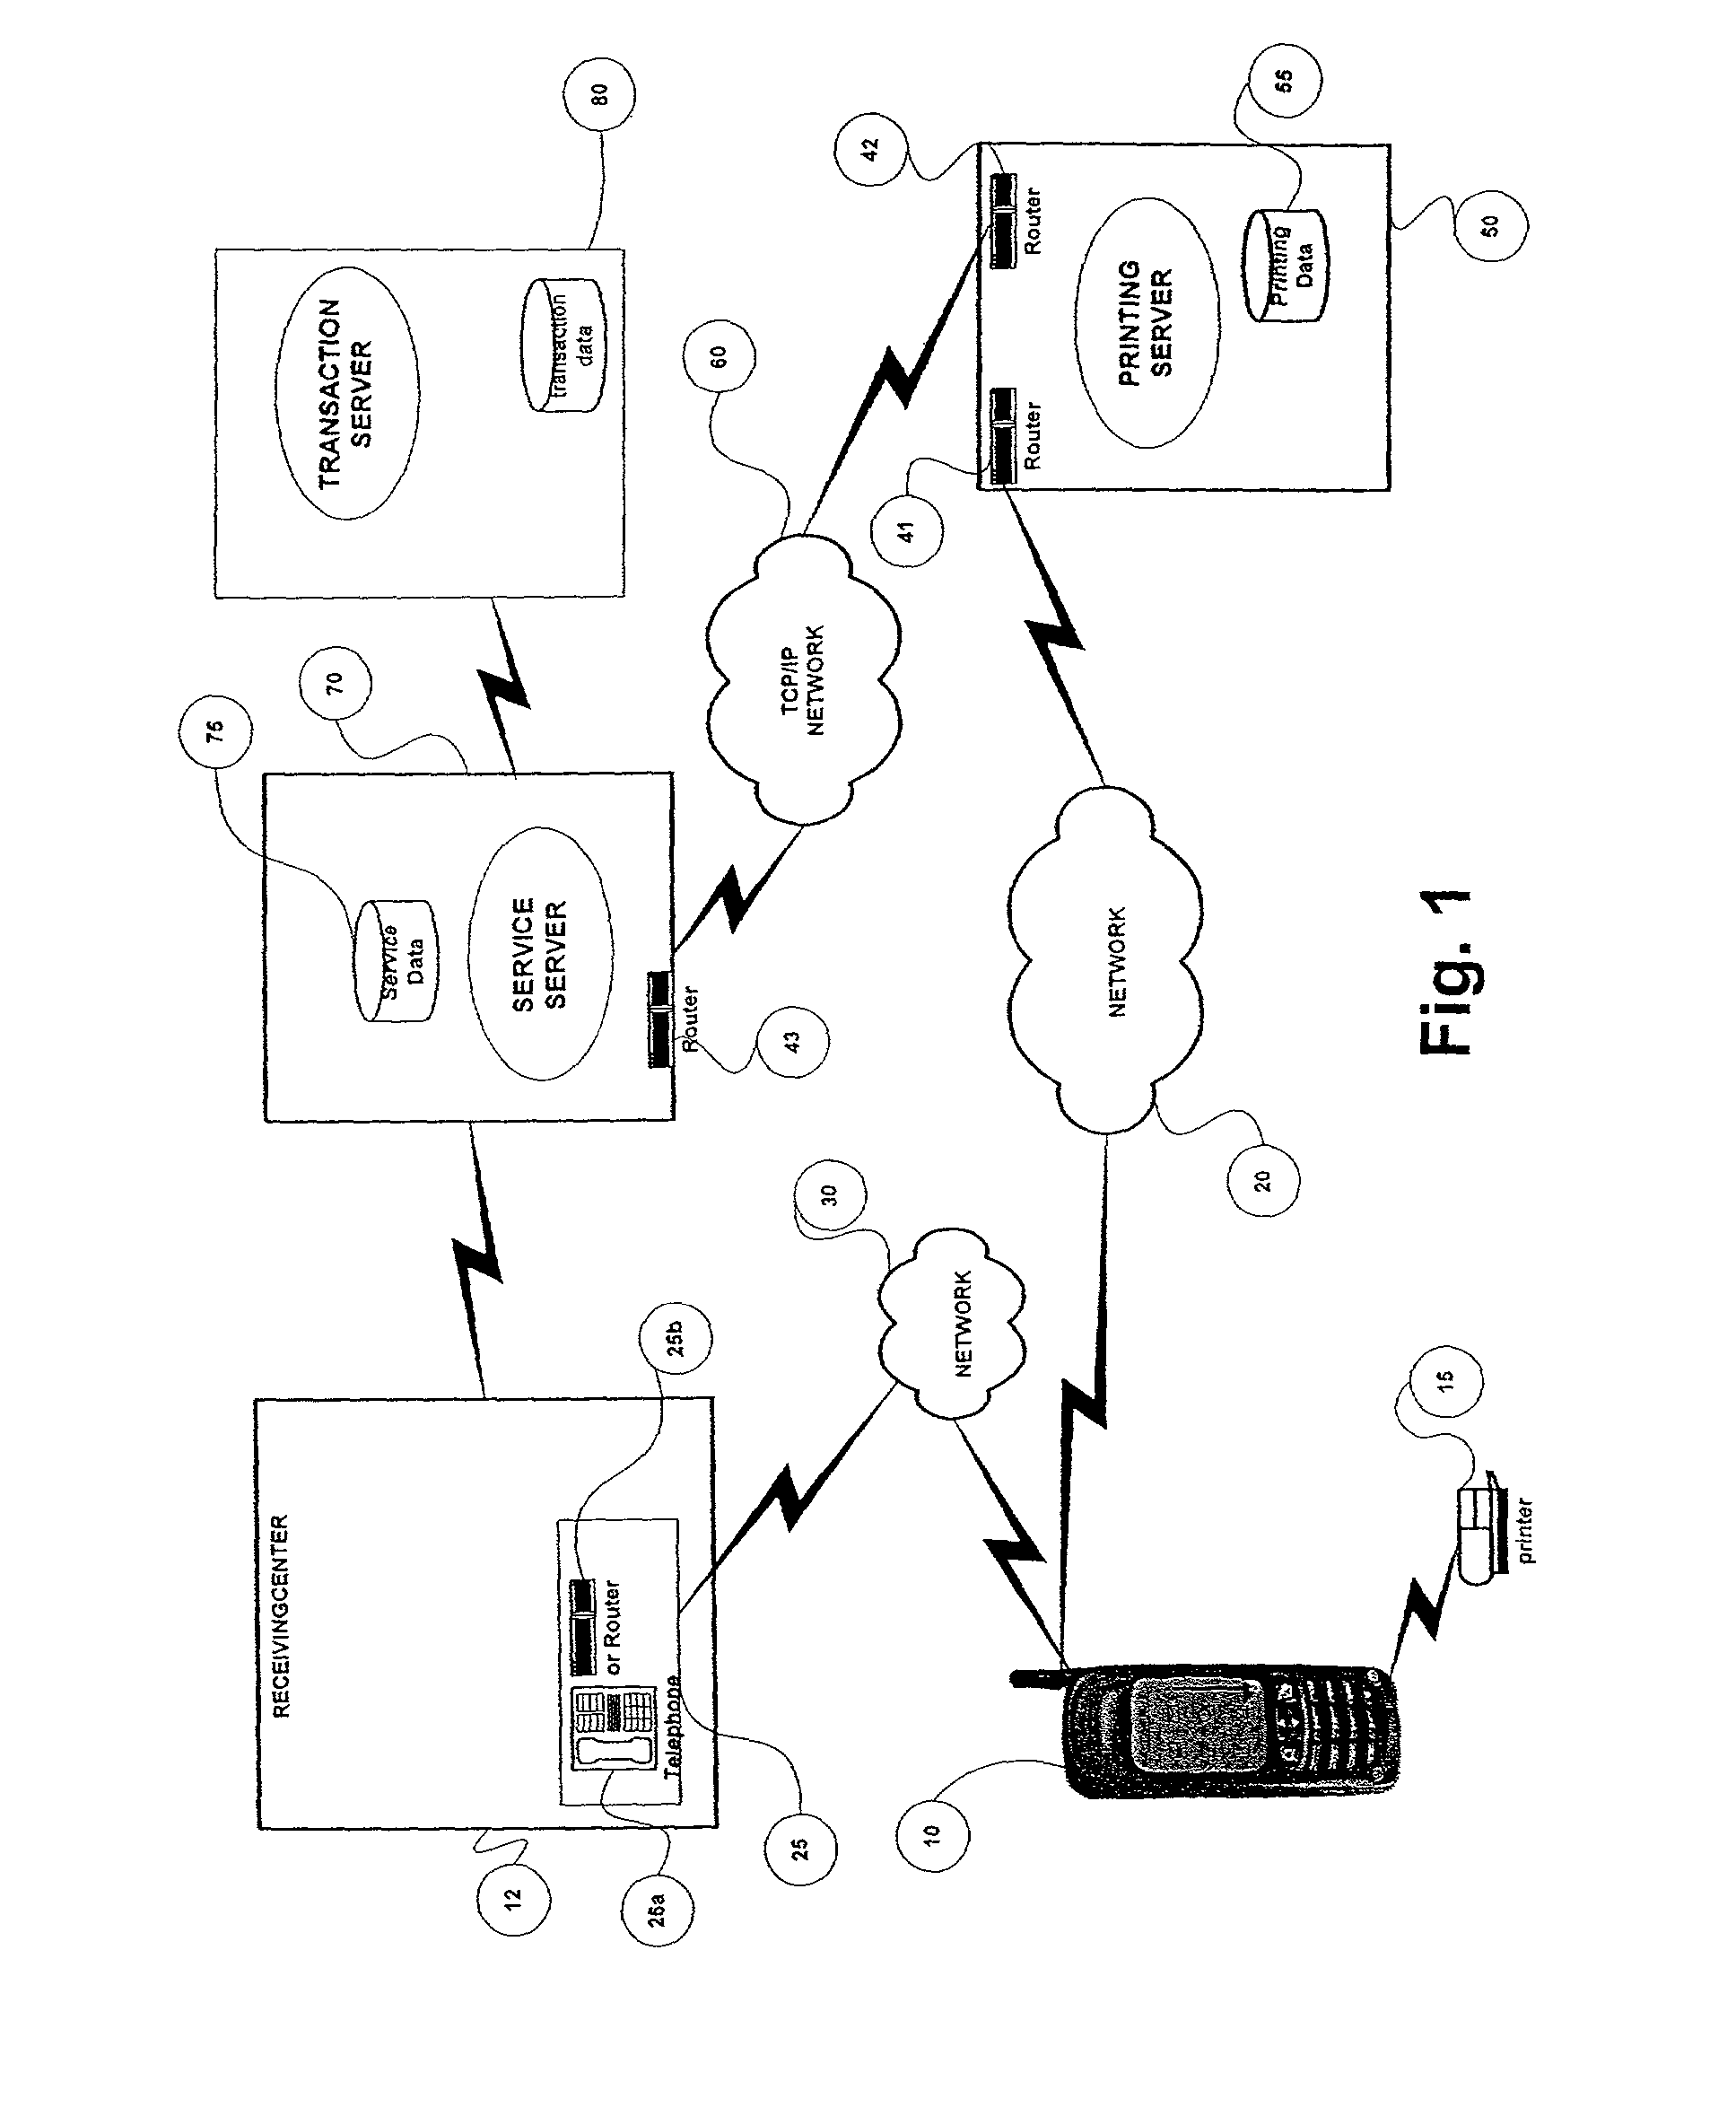 Method and system for generating a permanent record of a service provided to a mobile device